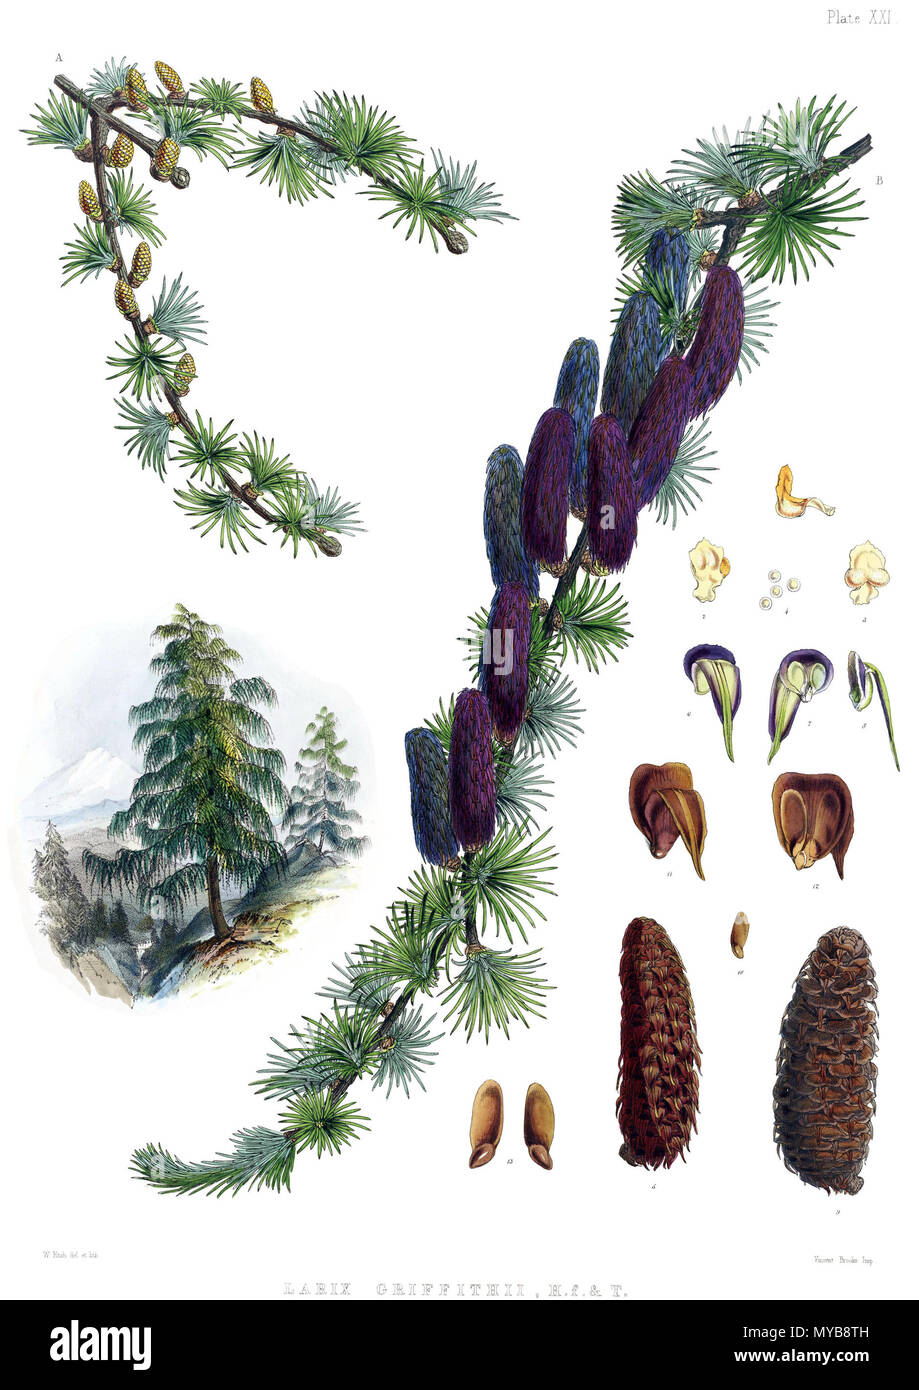 . Larix griffithii. Original caption: 'Plate XXI. A. Male branch. B. Female branch. Fig. 1, 2, 3. Anthers. 4. Pollen. 5. Young cone. 6, 7, 8. Scales and bracts. 9. Ripe cone. 10, 11. Its scales and bracts. 12. Ripe seeds. 13. The same :—all (but 5, 9, and 12) more or less magnified. Published 1855. Cathcart, John Fergusson (1802 - 1851) 313 Larix griffithii Stock Photo